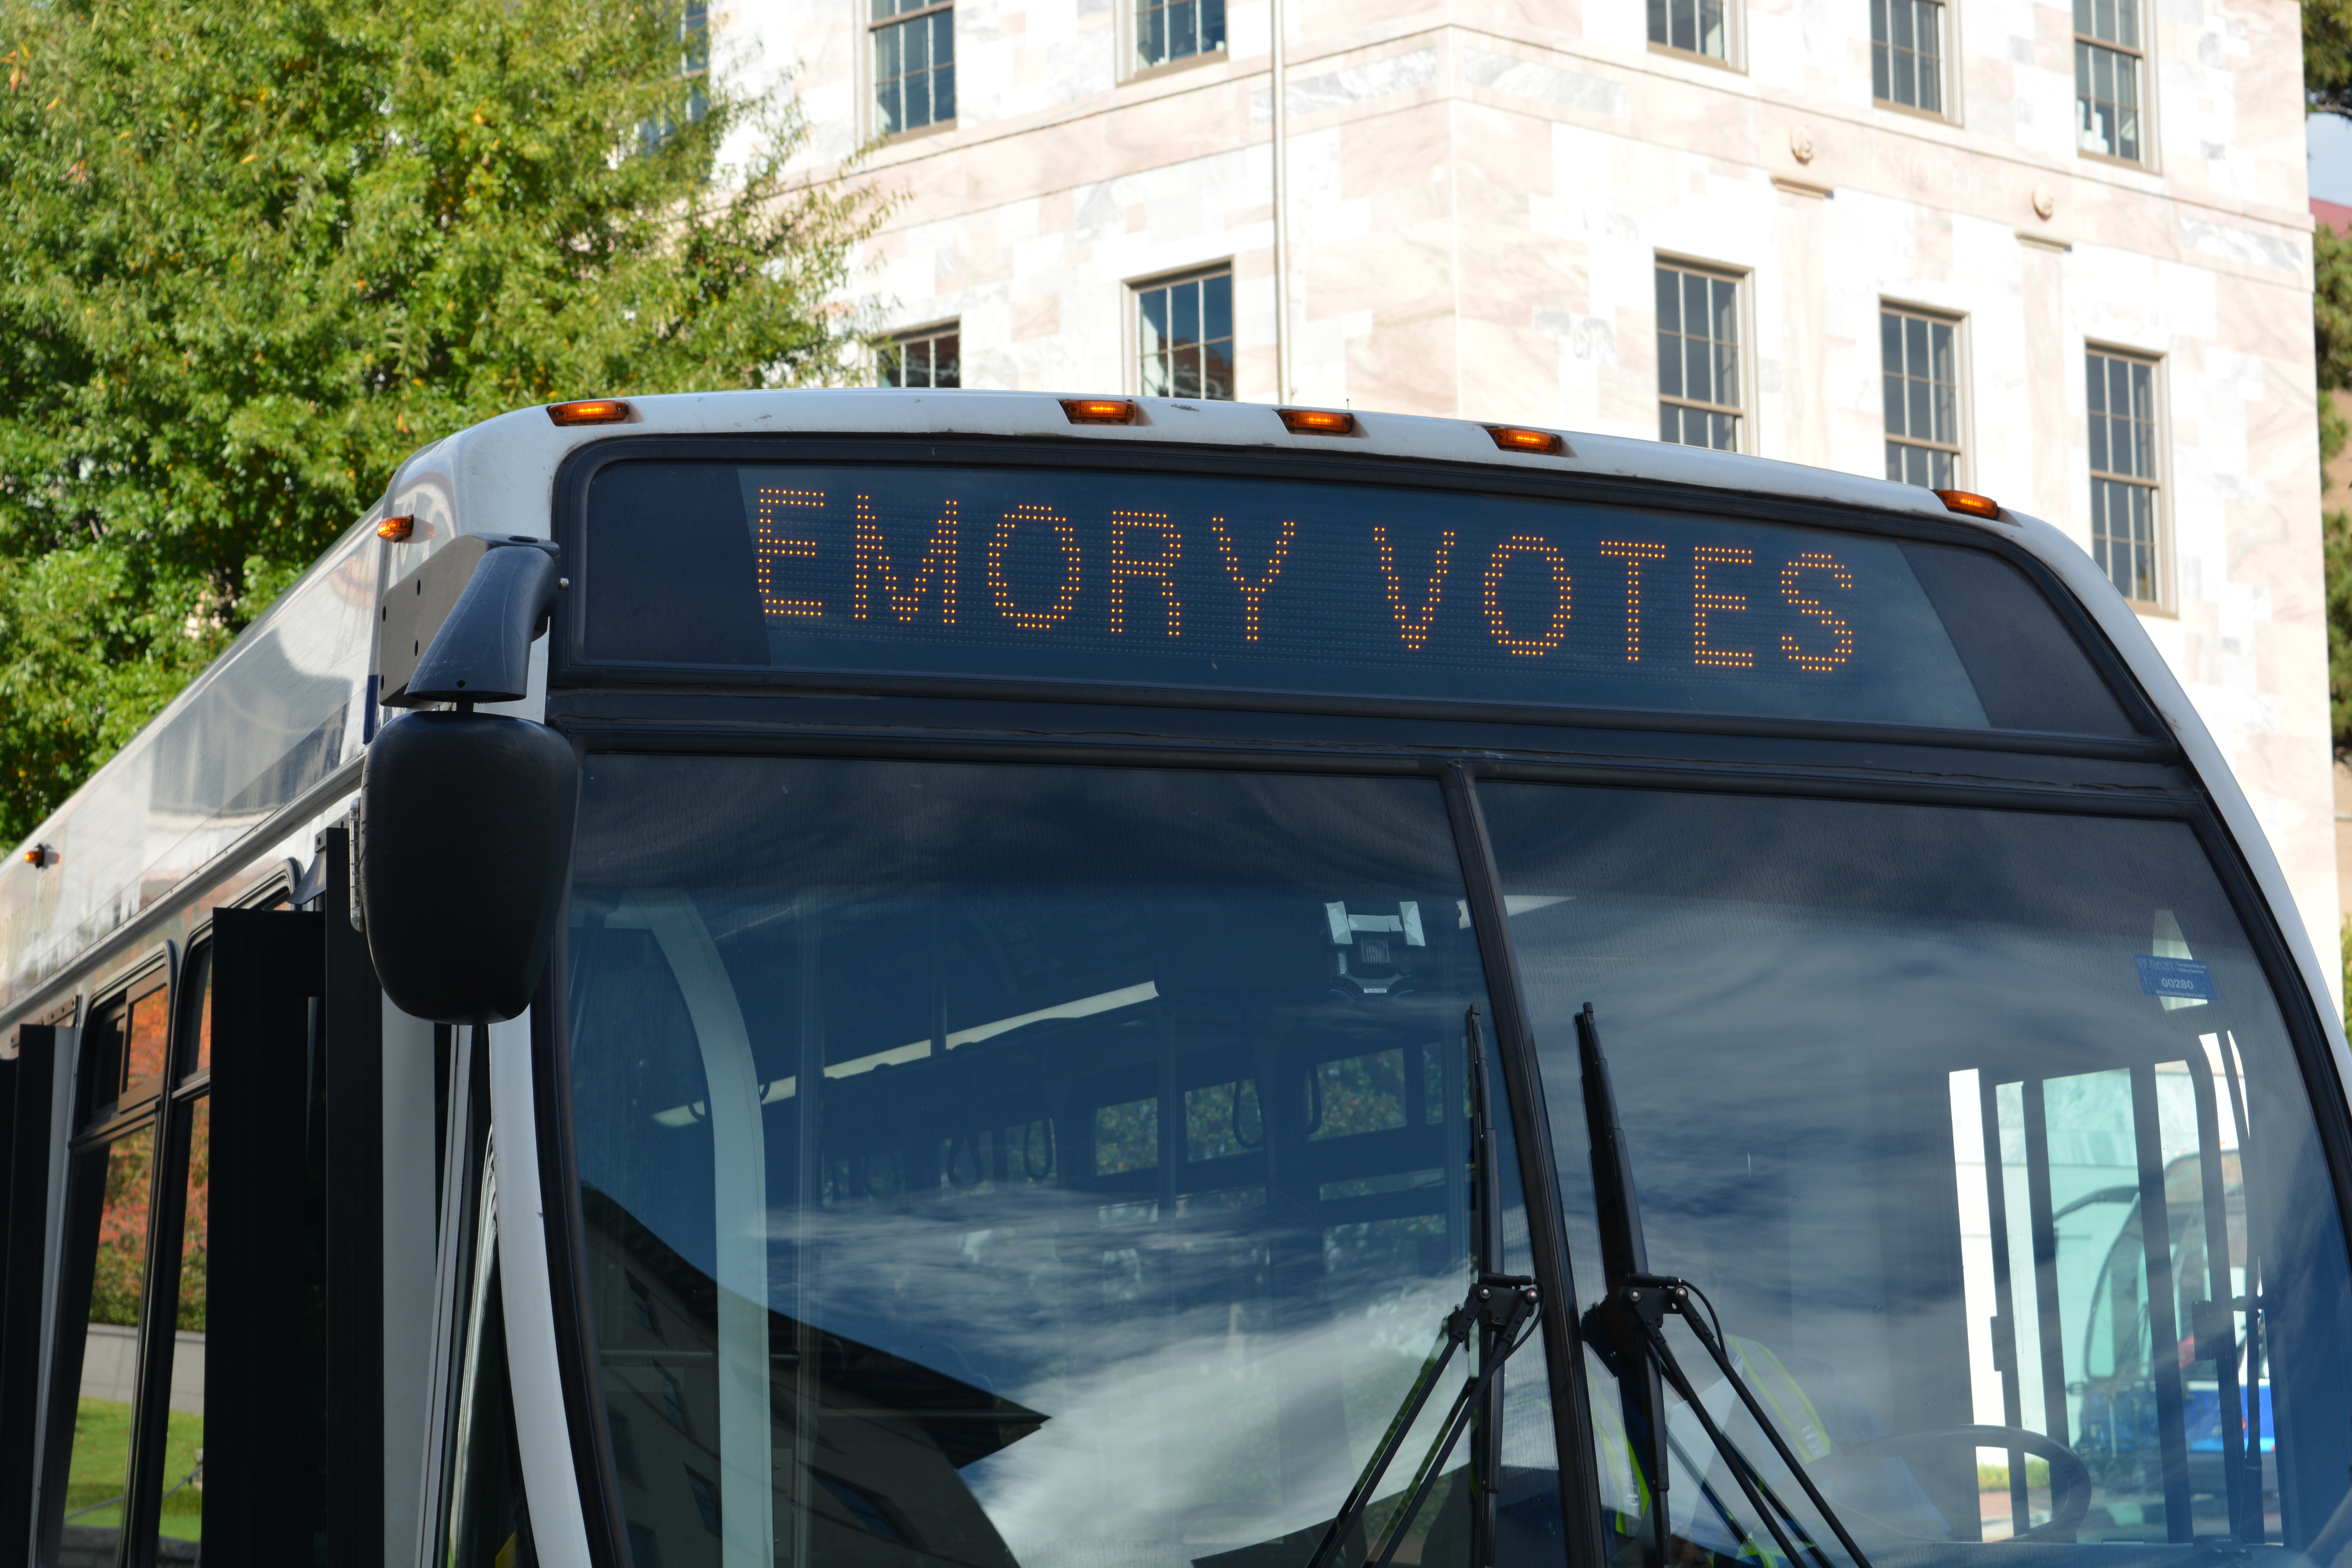 Emory Votes Initiative Provides Shuttles to Early Polling Places